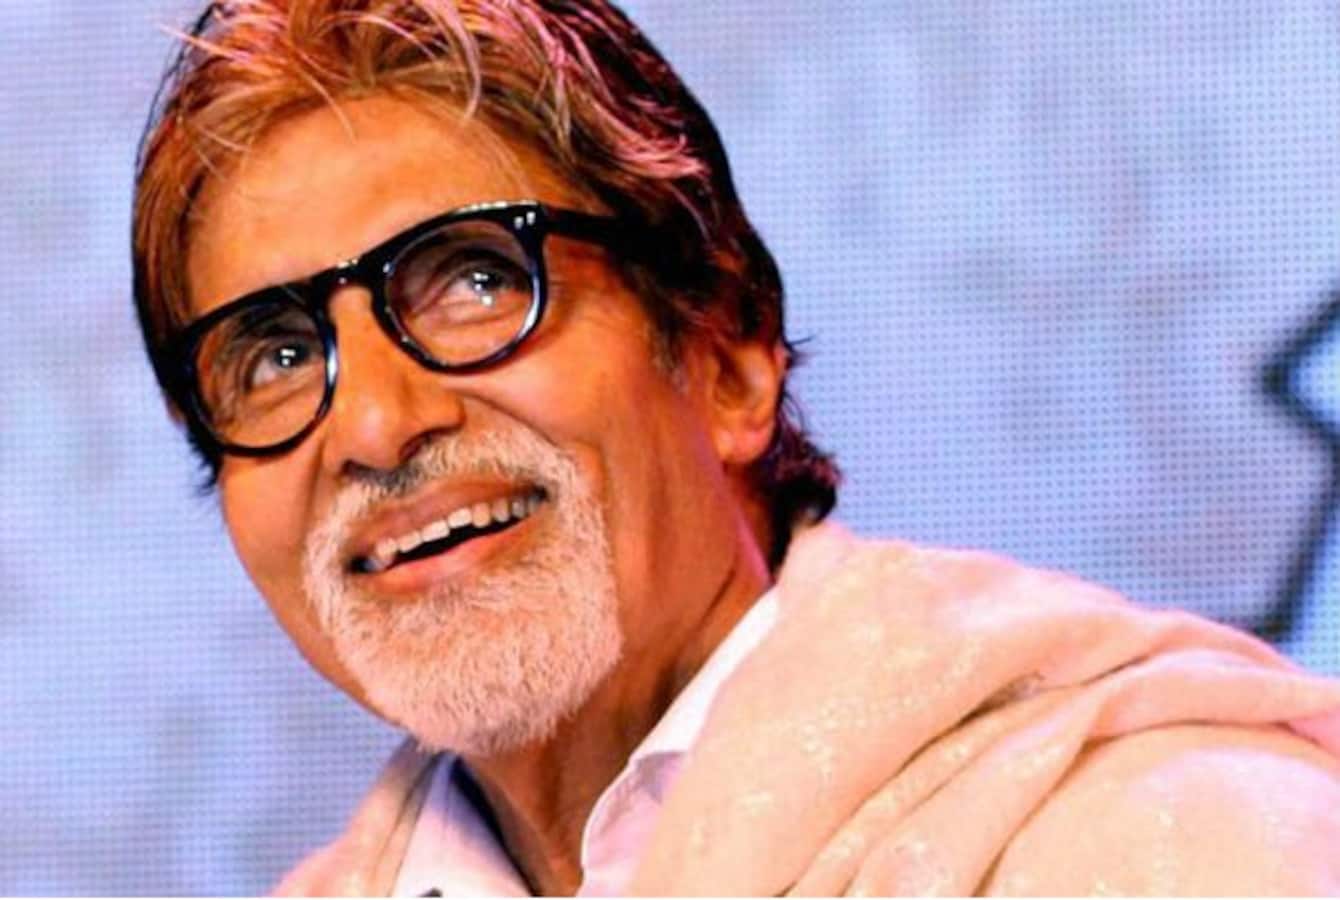 Amitabh Bachchan reveals one thing he dreads about outdoor shoots - find out